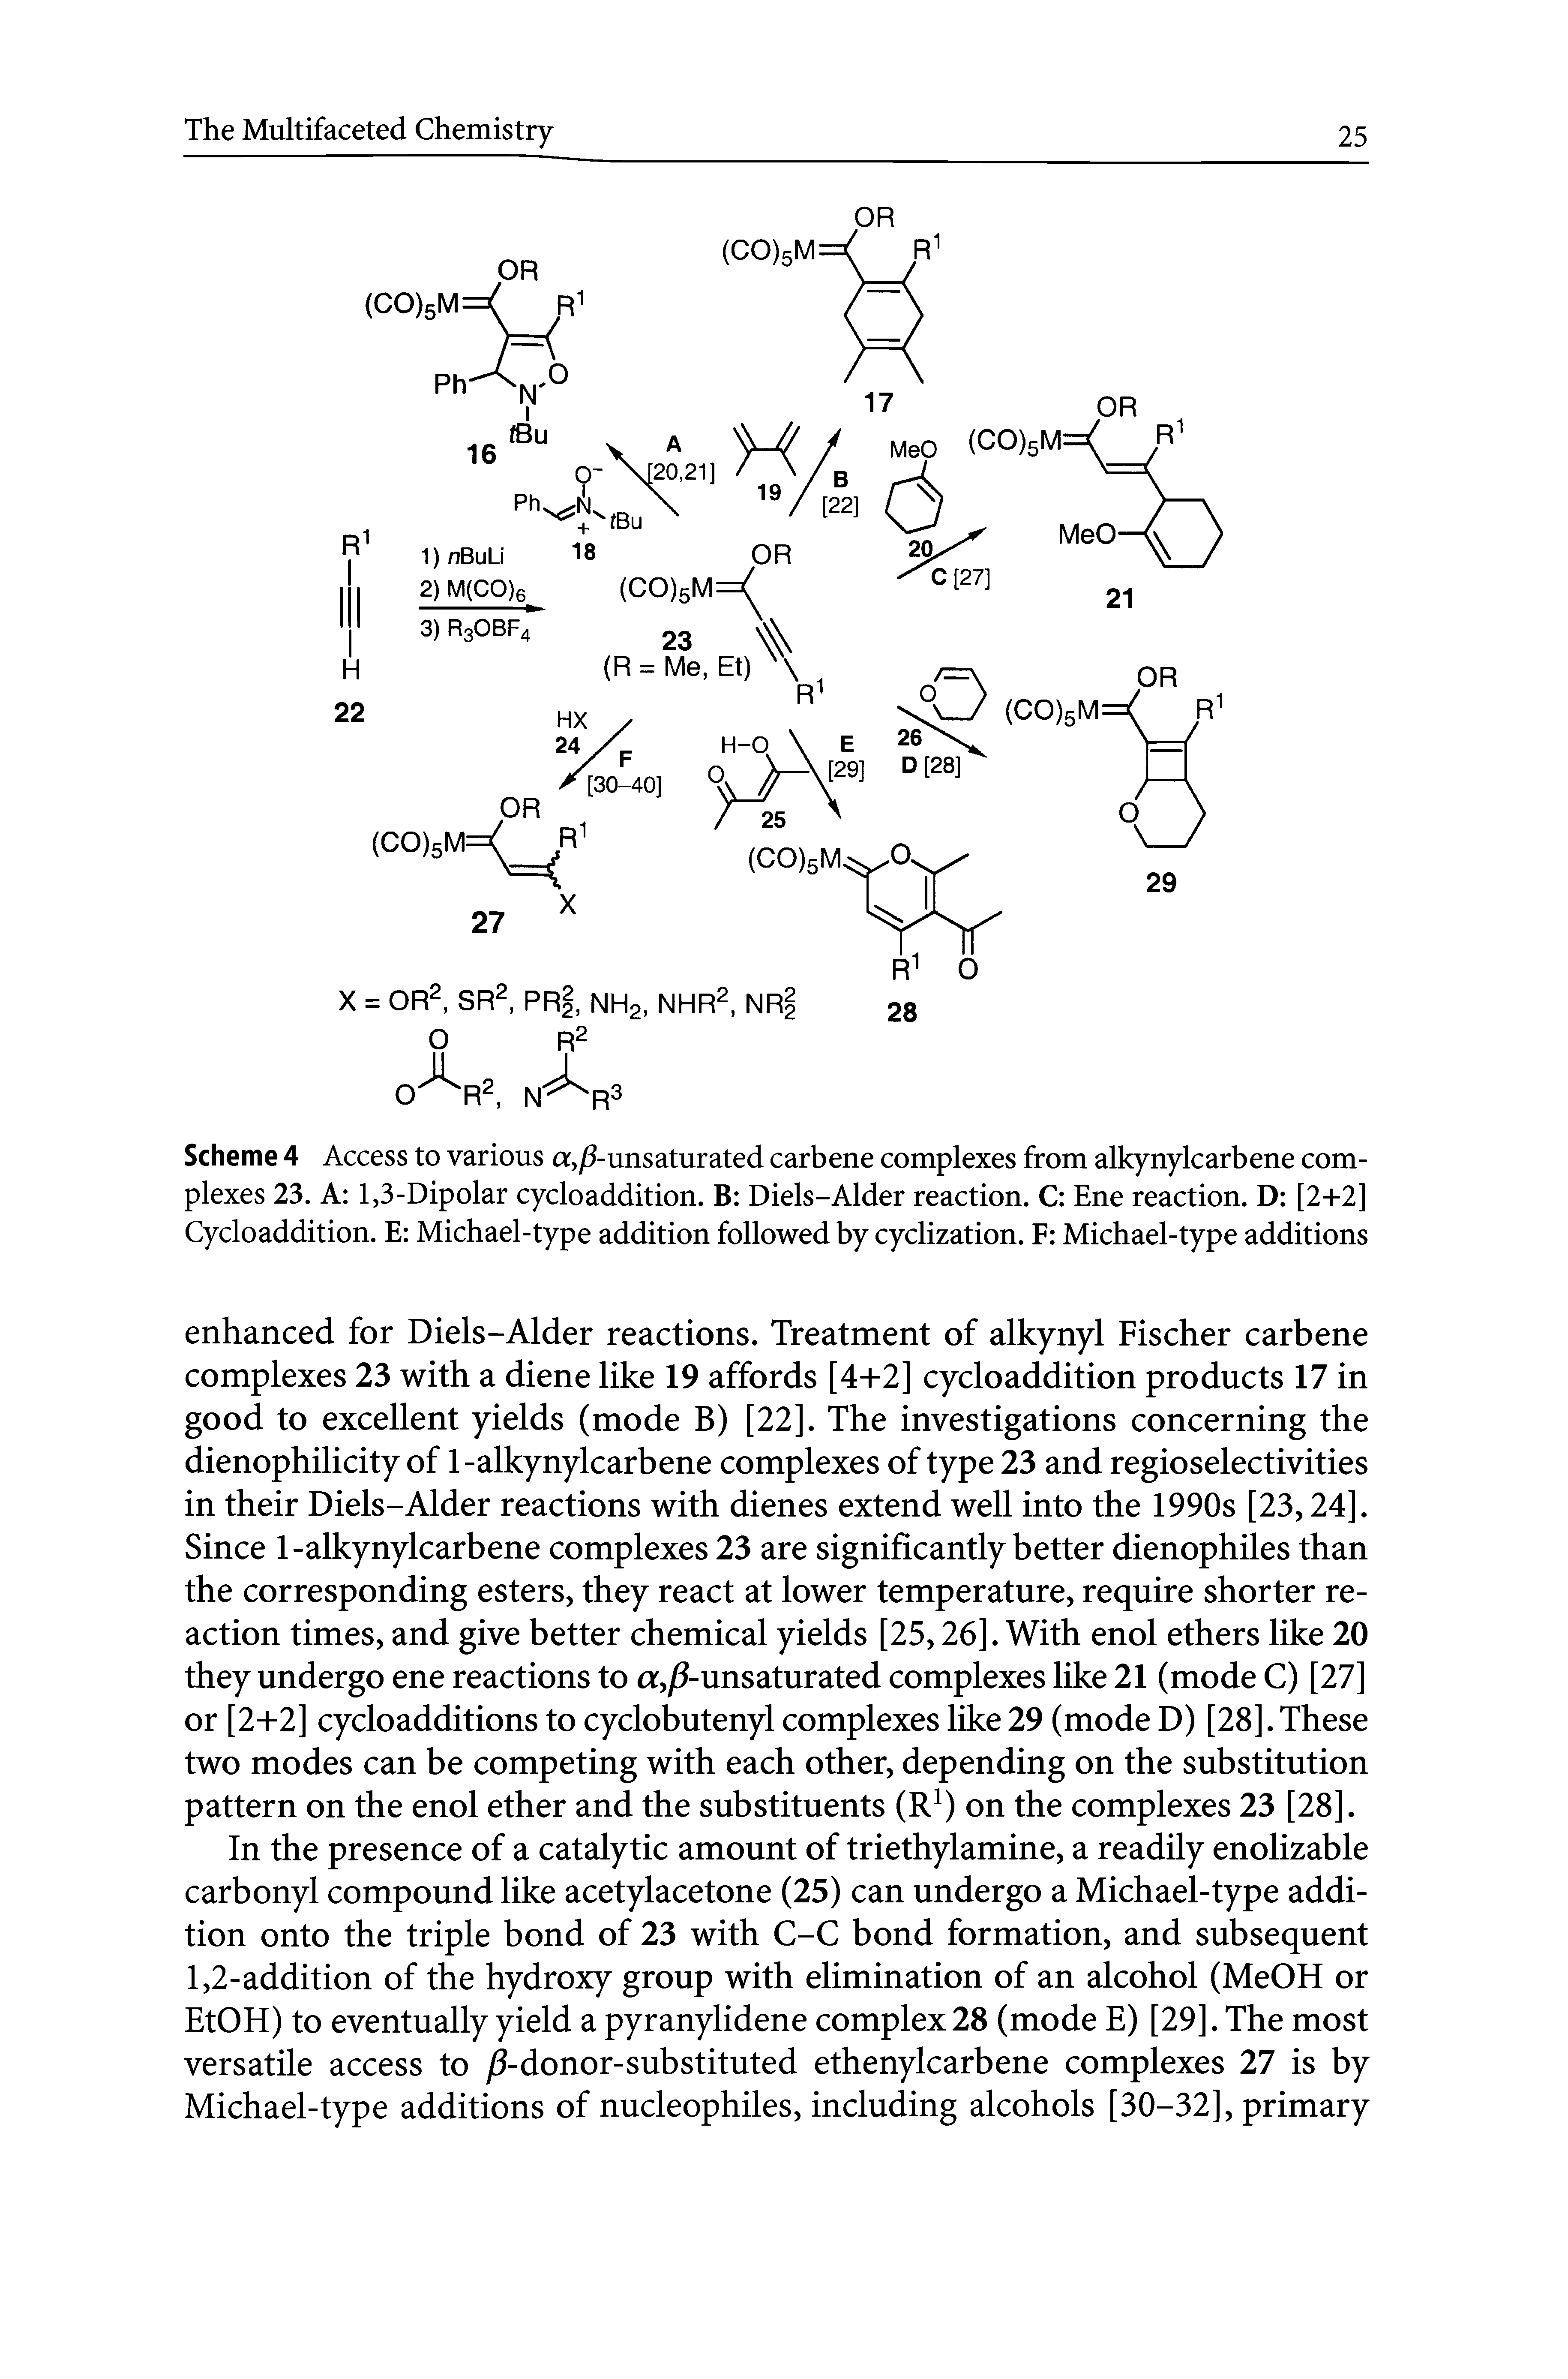 Scheme 4 Access to various a,/ -unsaturated carbene complexes from alkynylcarbene complexes 23. A 1,3-Dipolar cycloaddition. B Diels-Alder reaction. C Ene reaction. D [2+2] Cycloaddition. E Michael-type addition followed by cyclization. F Michael-type additions...